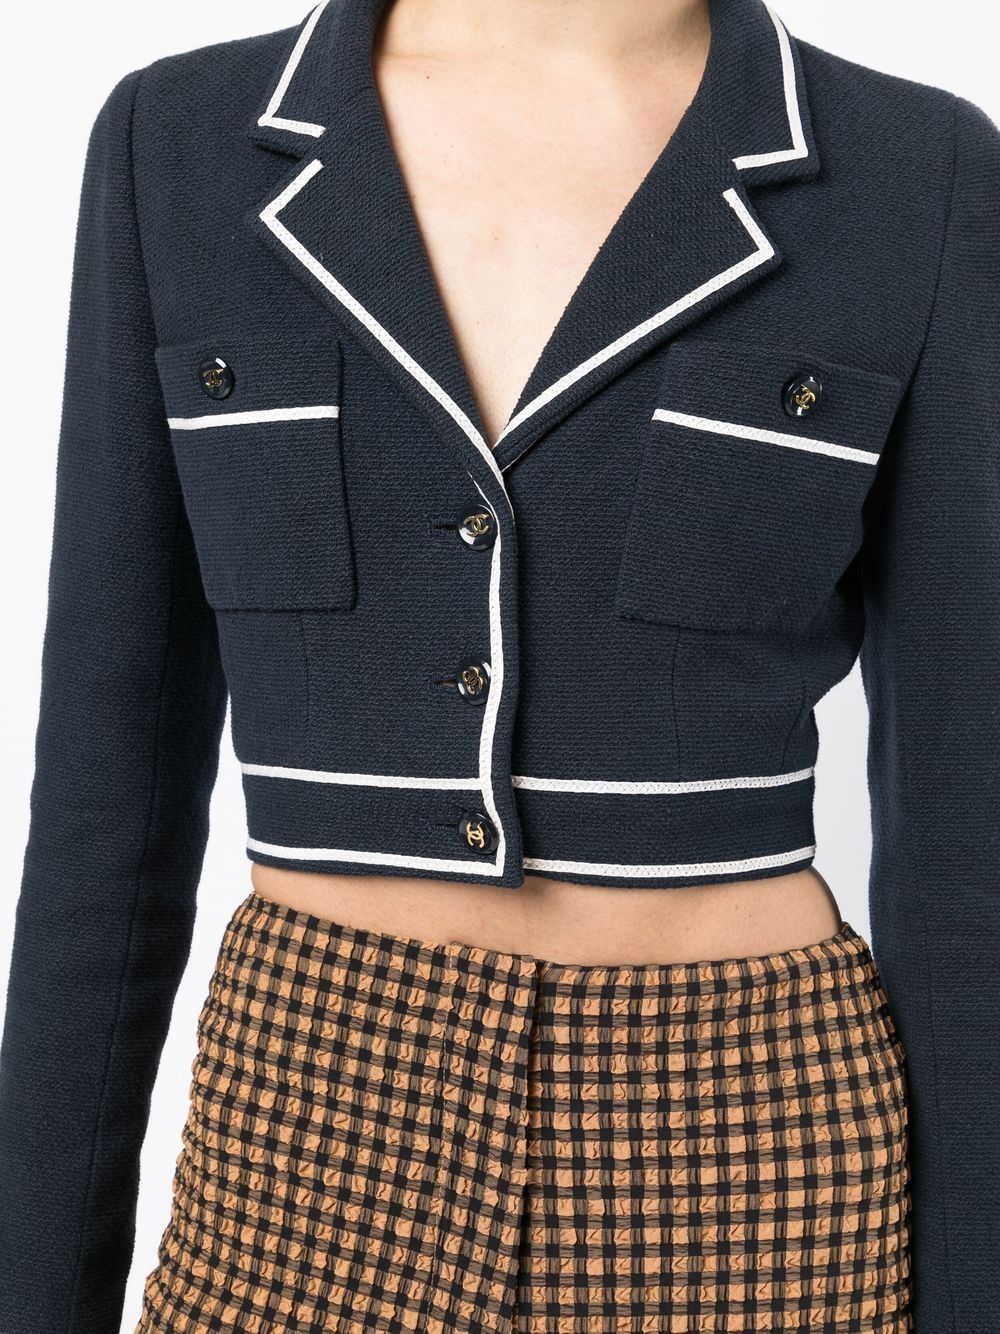 CHANEL Pre-Owned Cropped Faux Fur Jacket - Farfetch